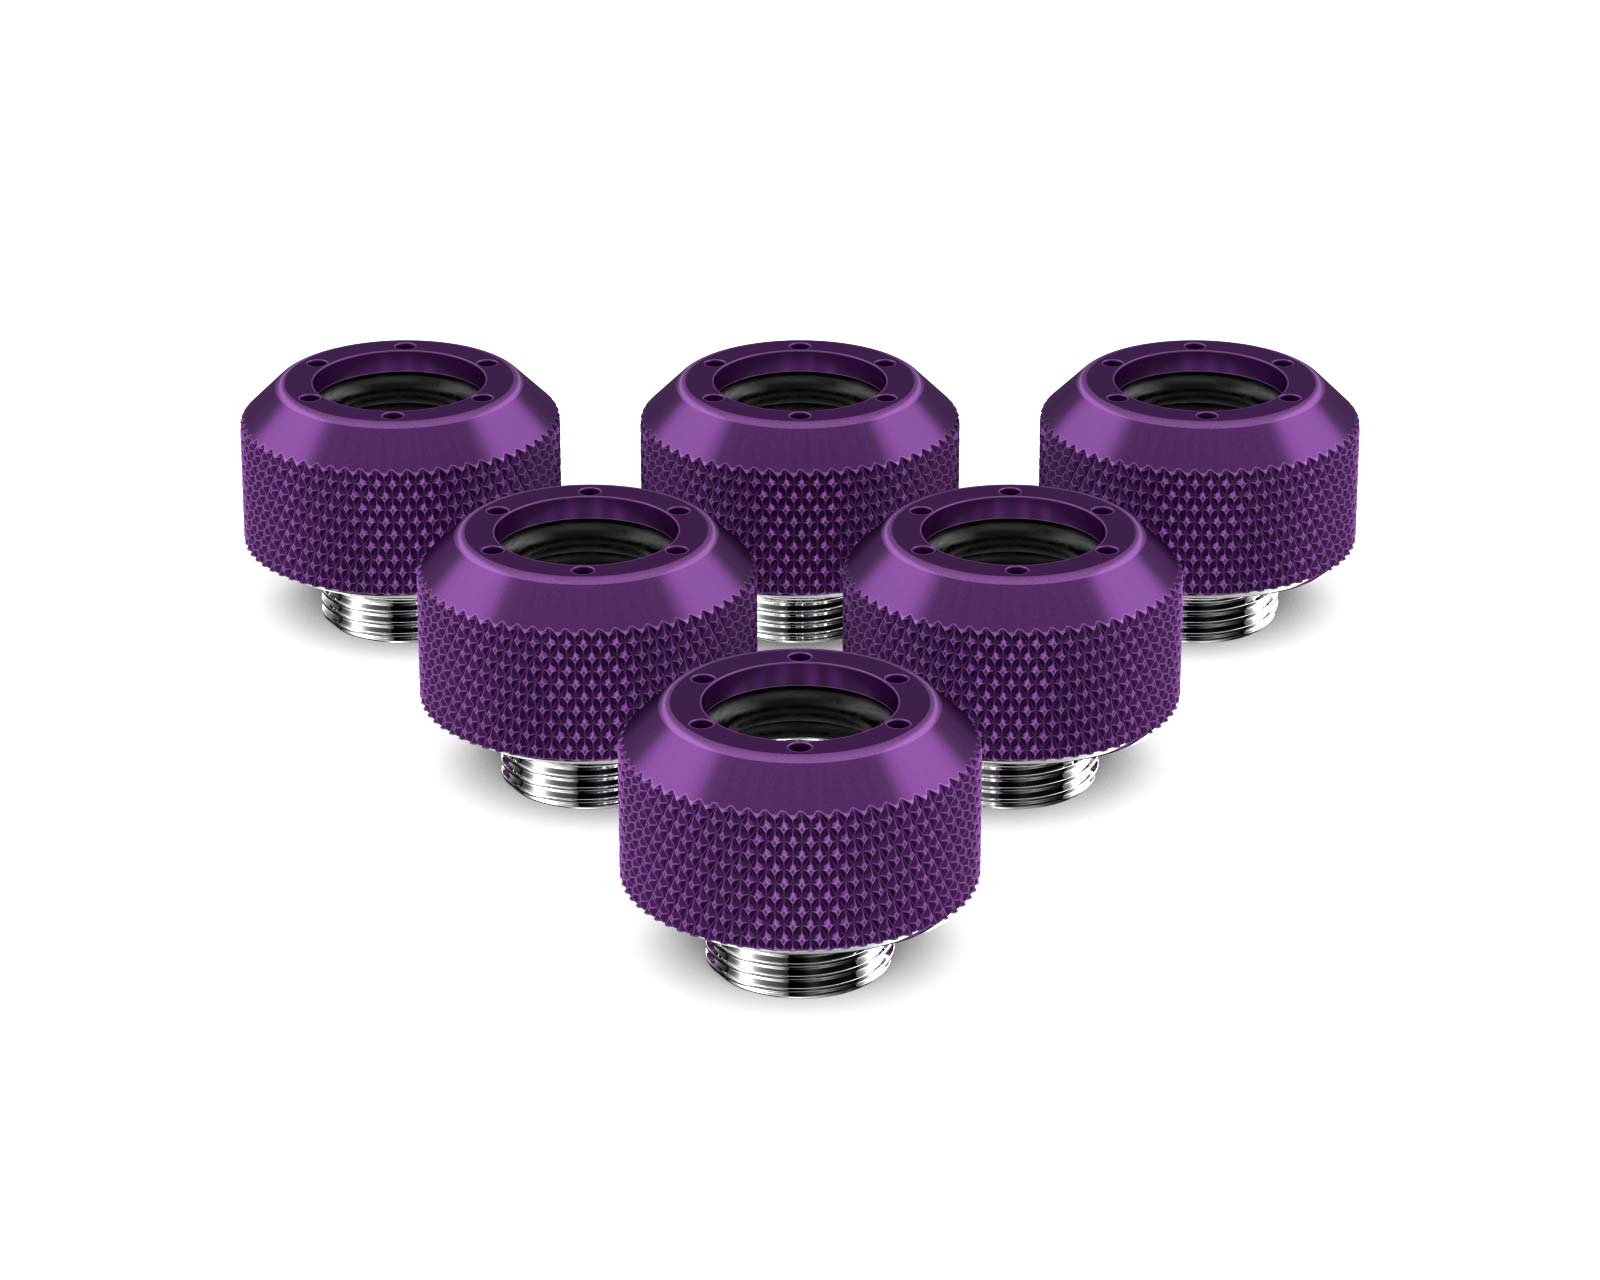 PrimoChill 1/2in. Rigid RevolverSX Series Fitting - 6 pack - PrimoChill - KEEPING IT COOL Candy Purple